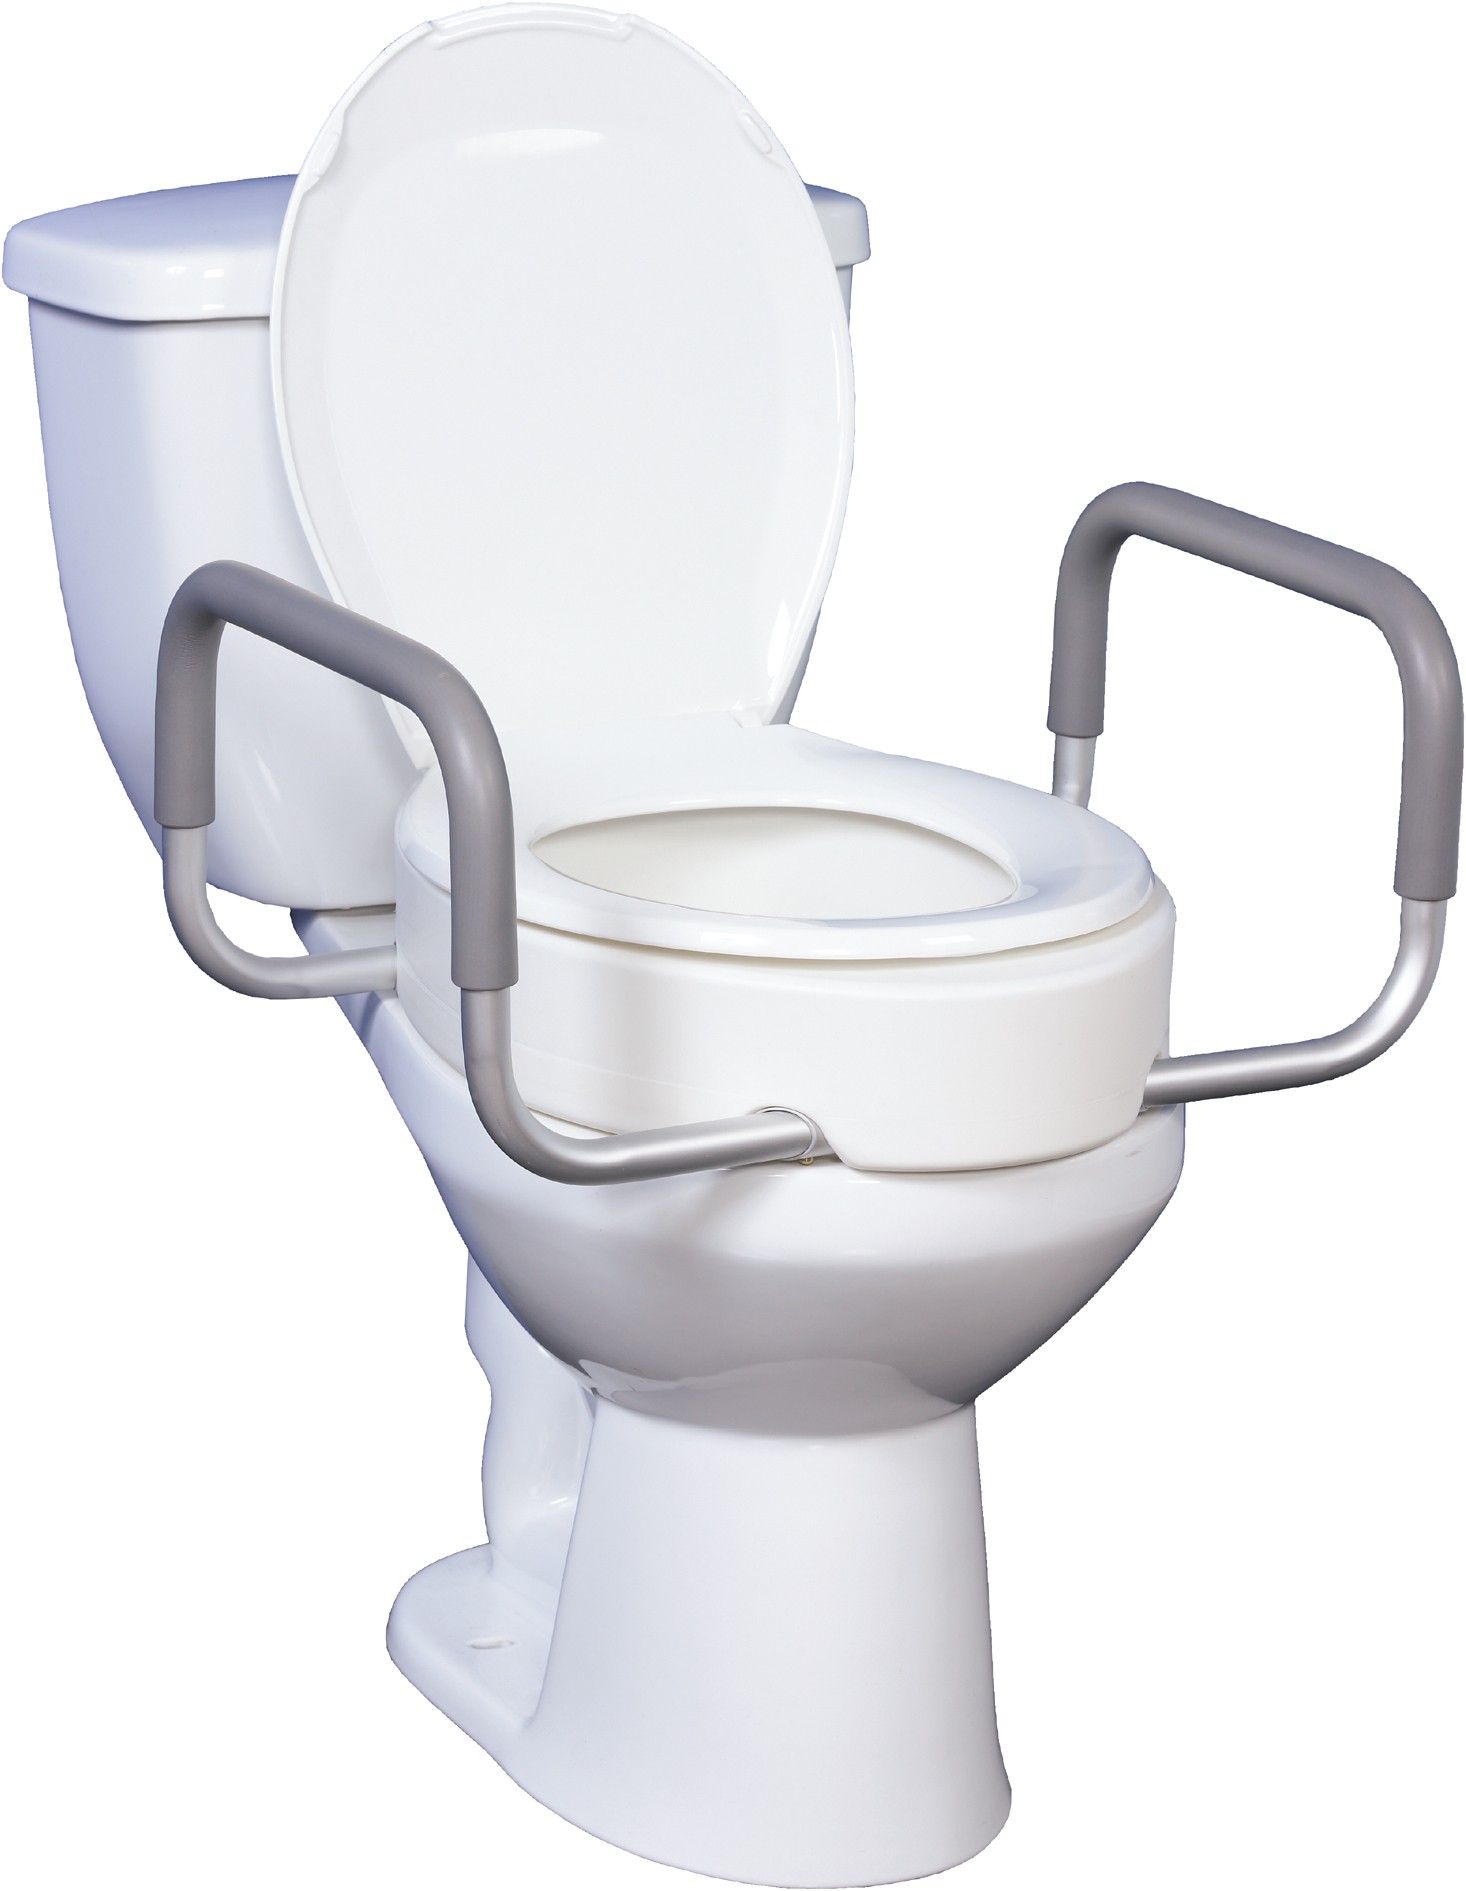 Ridder A0070700 Toilet Riser Seat Premium With Soft Close System White 